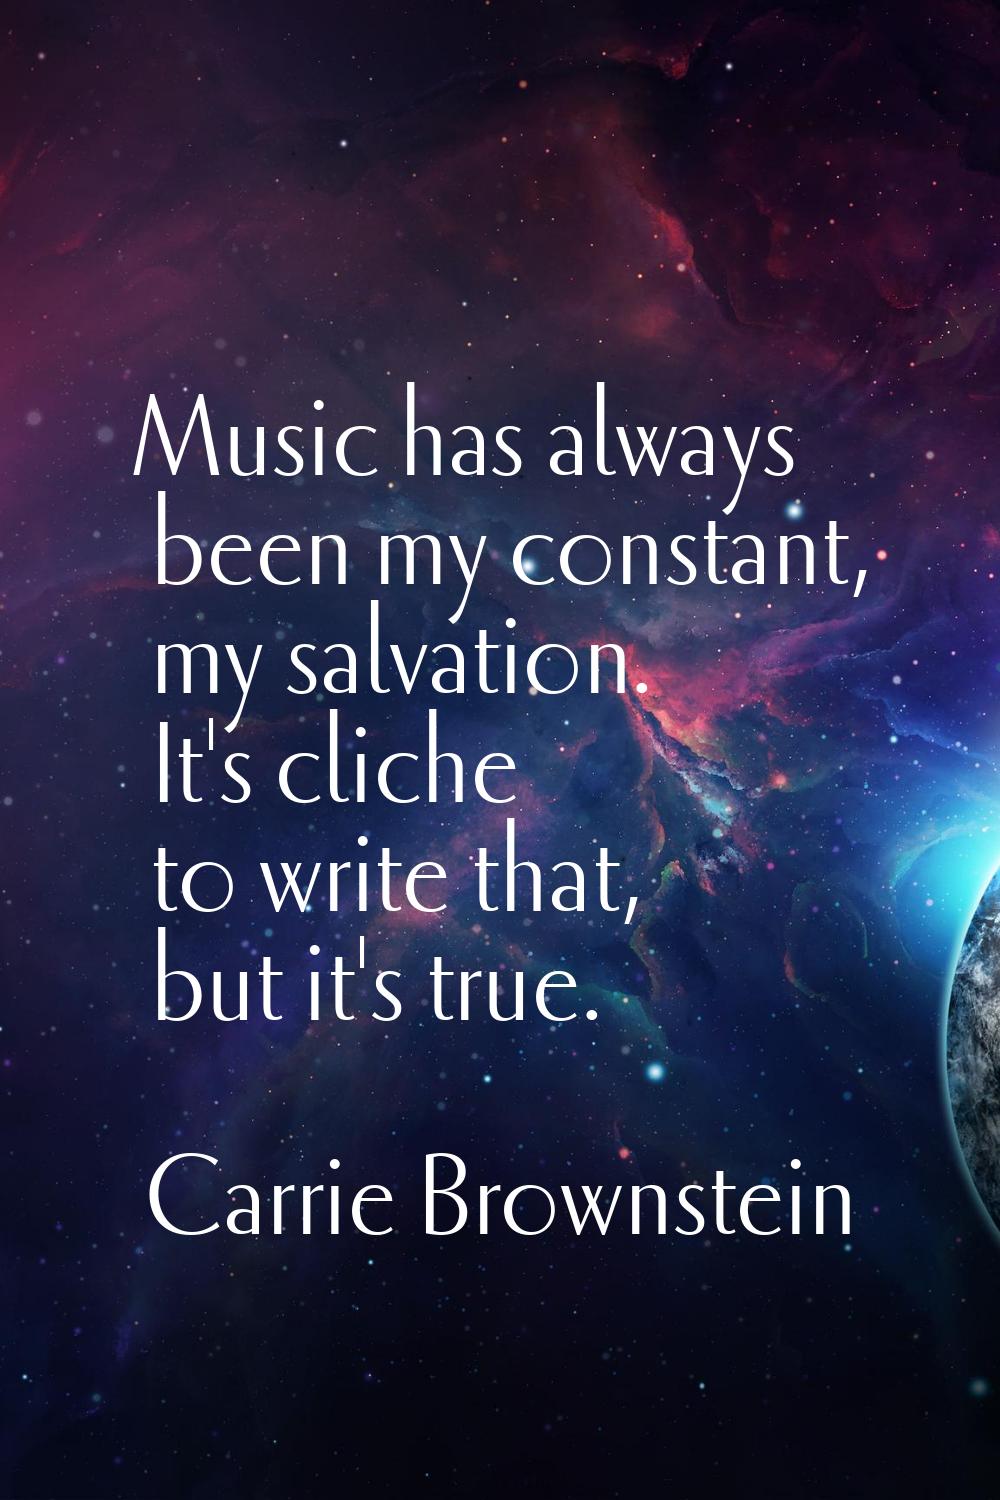 Music has always been my constant, my salvation. It's cliche to write that, but it's true.